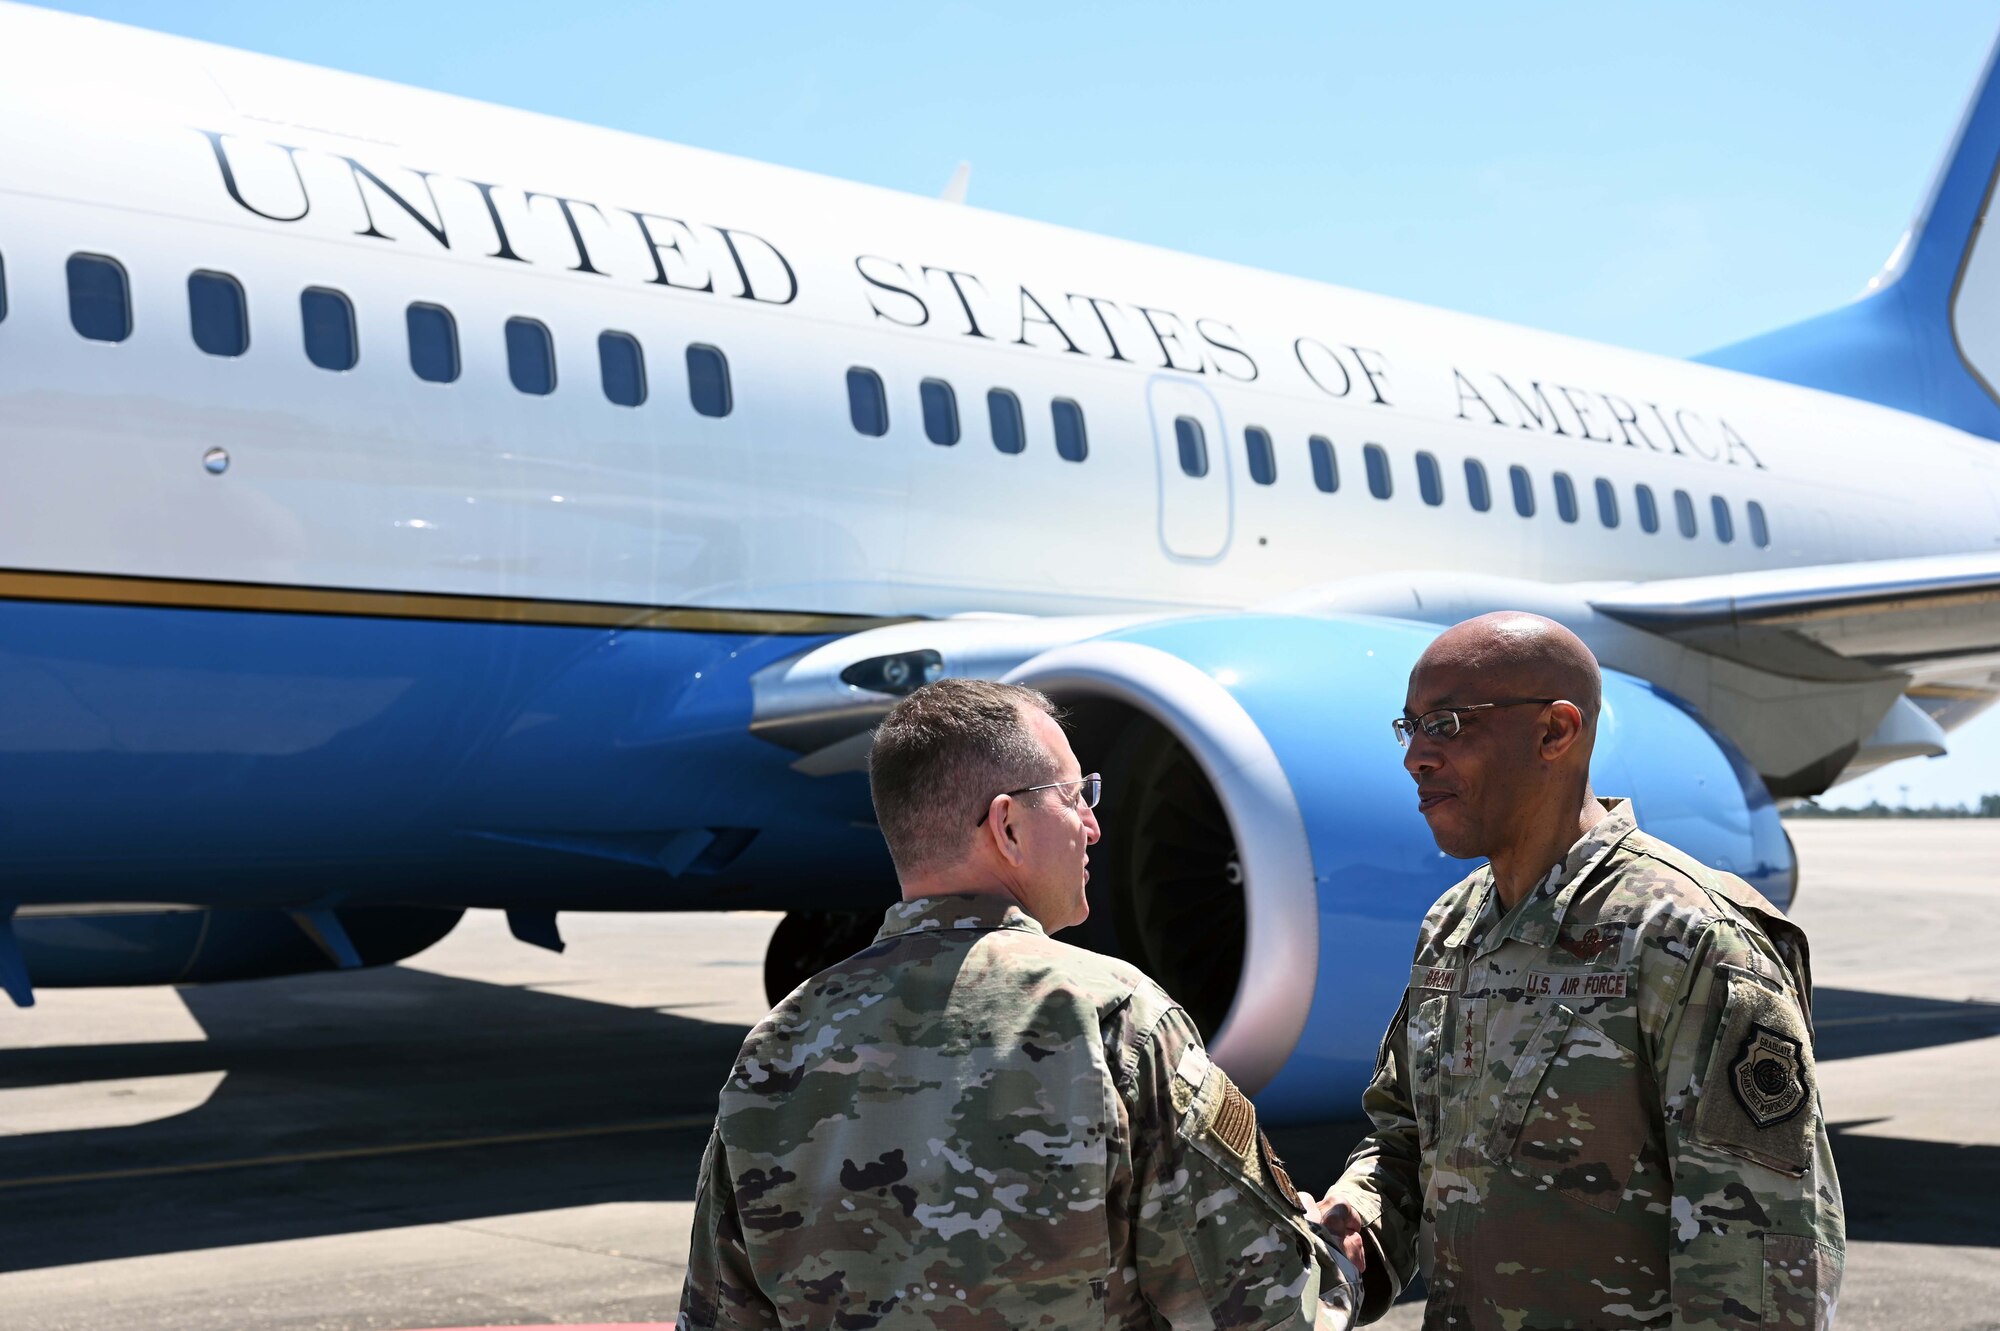 Air Force Chief of Staff Gen. CQ Brown, Jr., talks with U.S. Air Force Lt. Gen. Jim Slife, commander of Air Force Special Operations Command, before departing Hurlburt Field, Florida, April 4, 2022. During his visit, Brown met with junior enlisted Airmen and received command updates from Headquarters AFSOC staff and briefings on Mission Sustainment Teams, Aviation Special Operations Task Units and Special Operations Task Groups. (U.S. Air Force photo by Staff Sgt. Brandon Esau)